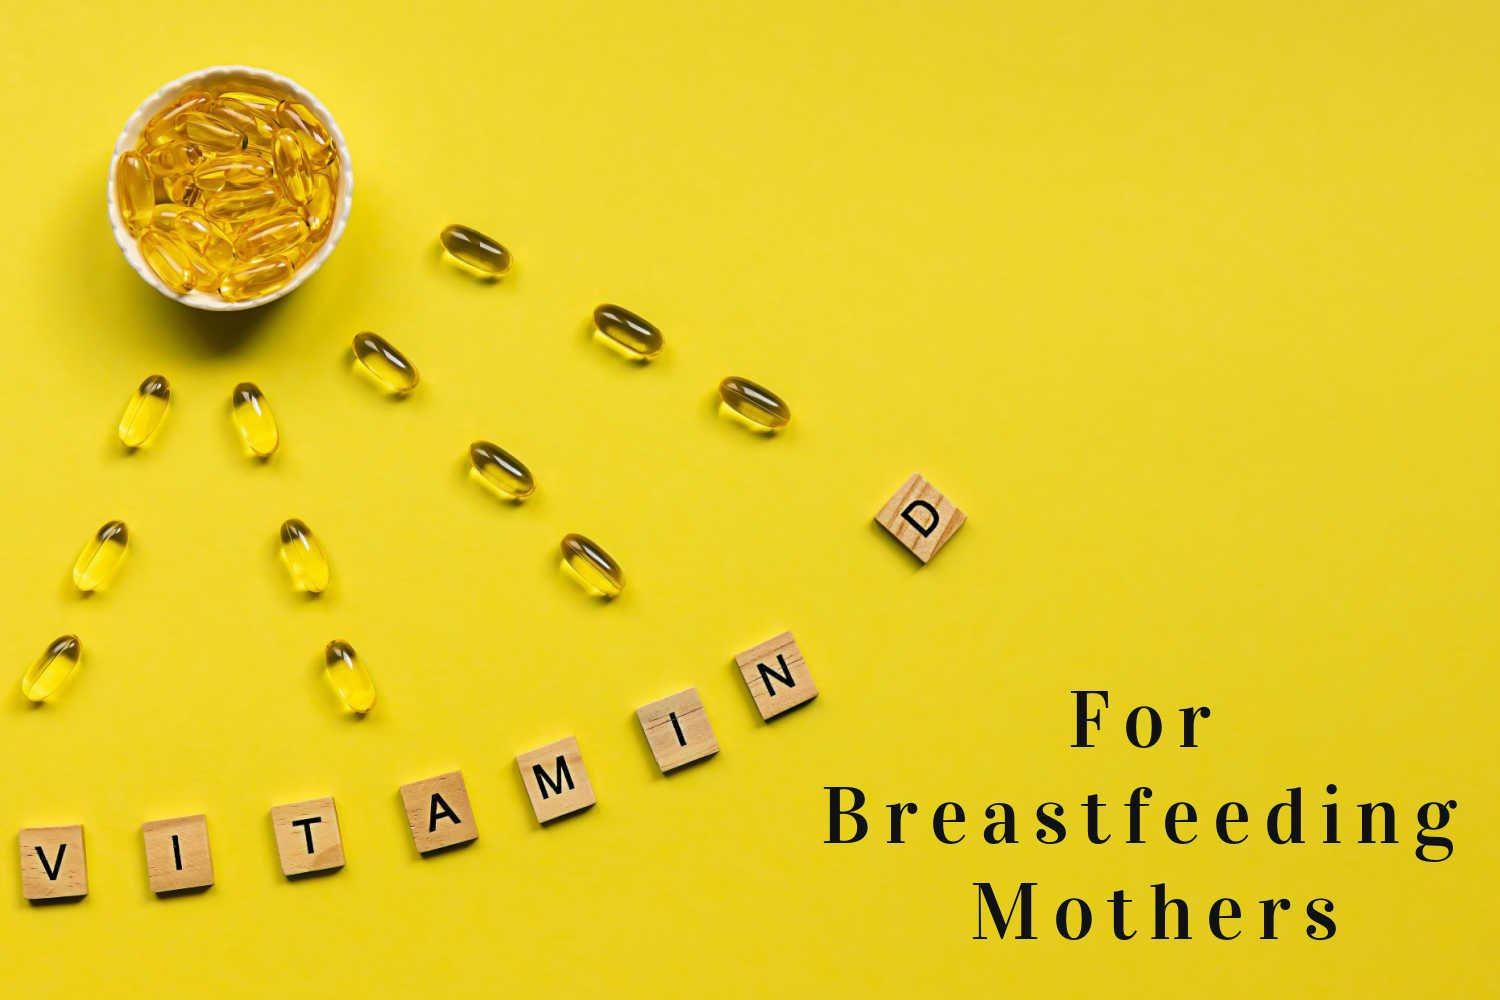 Vitamin D For Breastfeeding Mothers – Everything You Need to Know